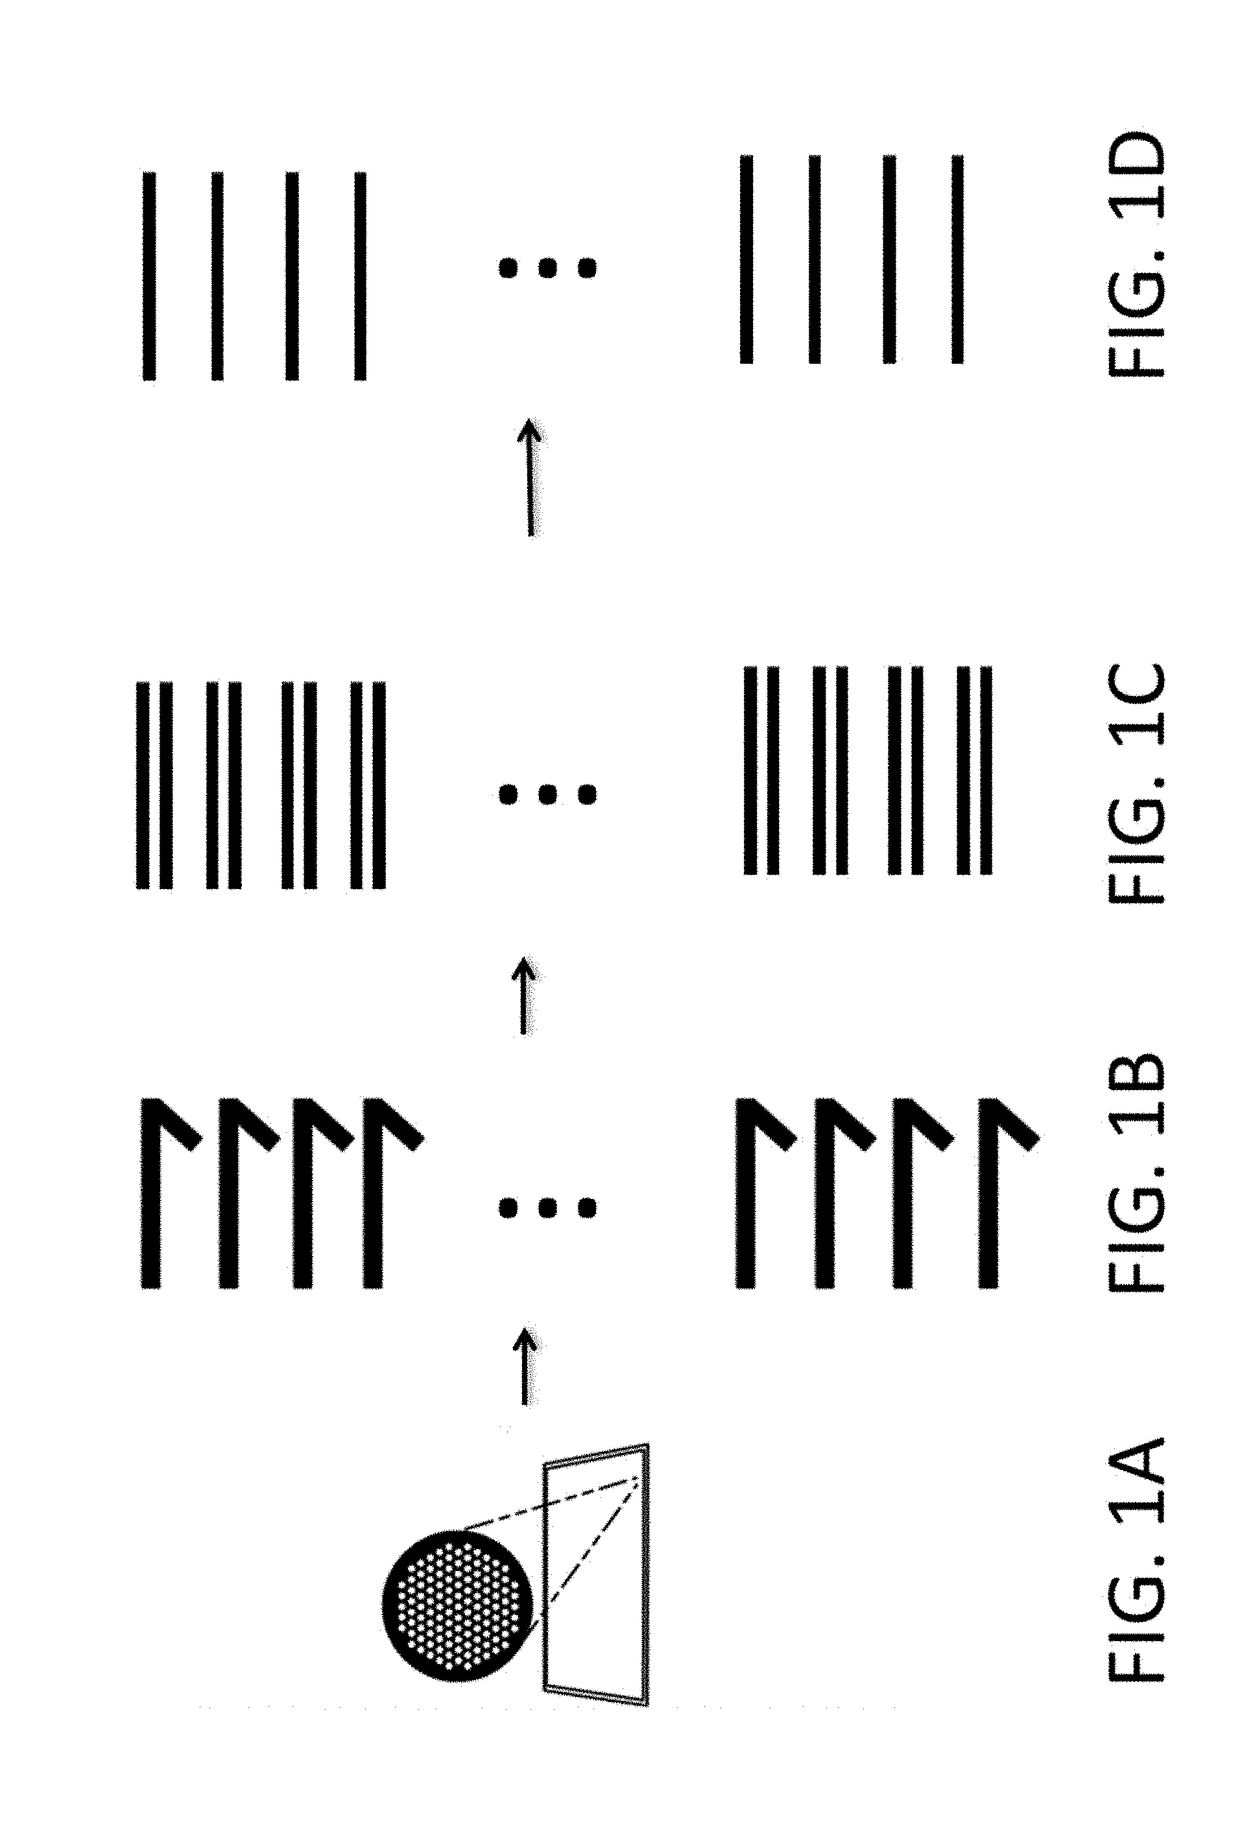 Variant libraries of the immunological synapse and synthesis thereof